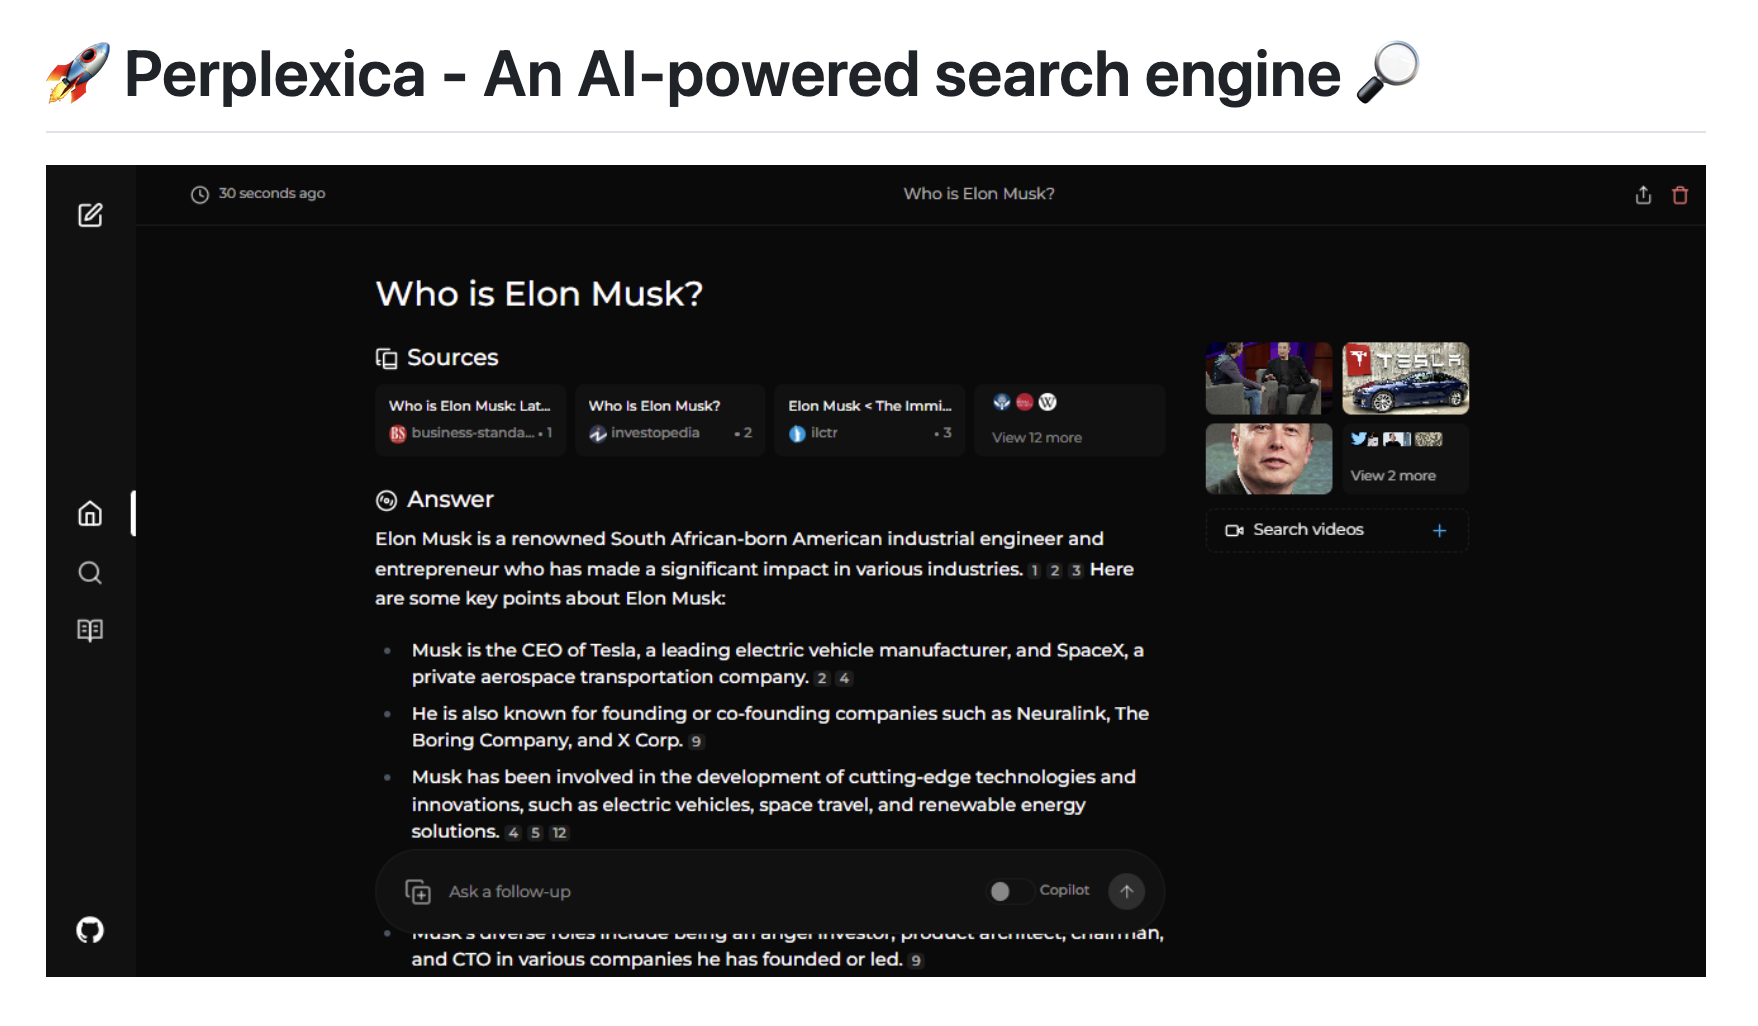  Perplexica: The Open-Source Solution Replicating Billion Dollar Perplexity for AI Search Tools